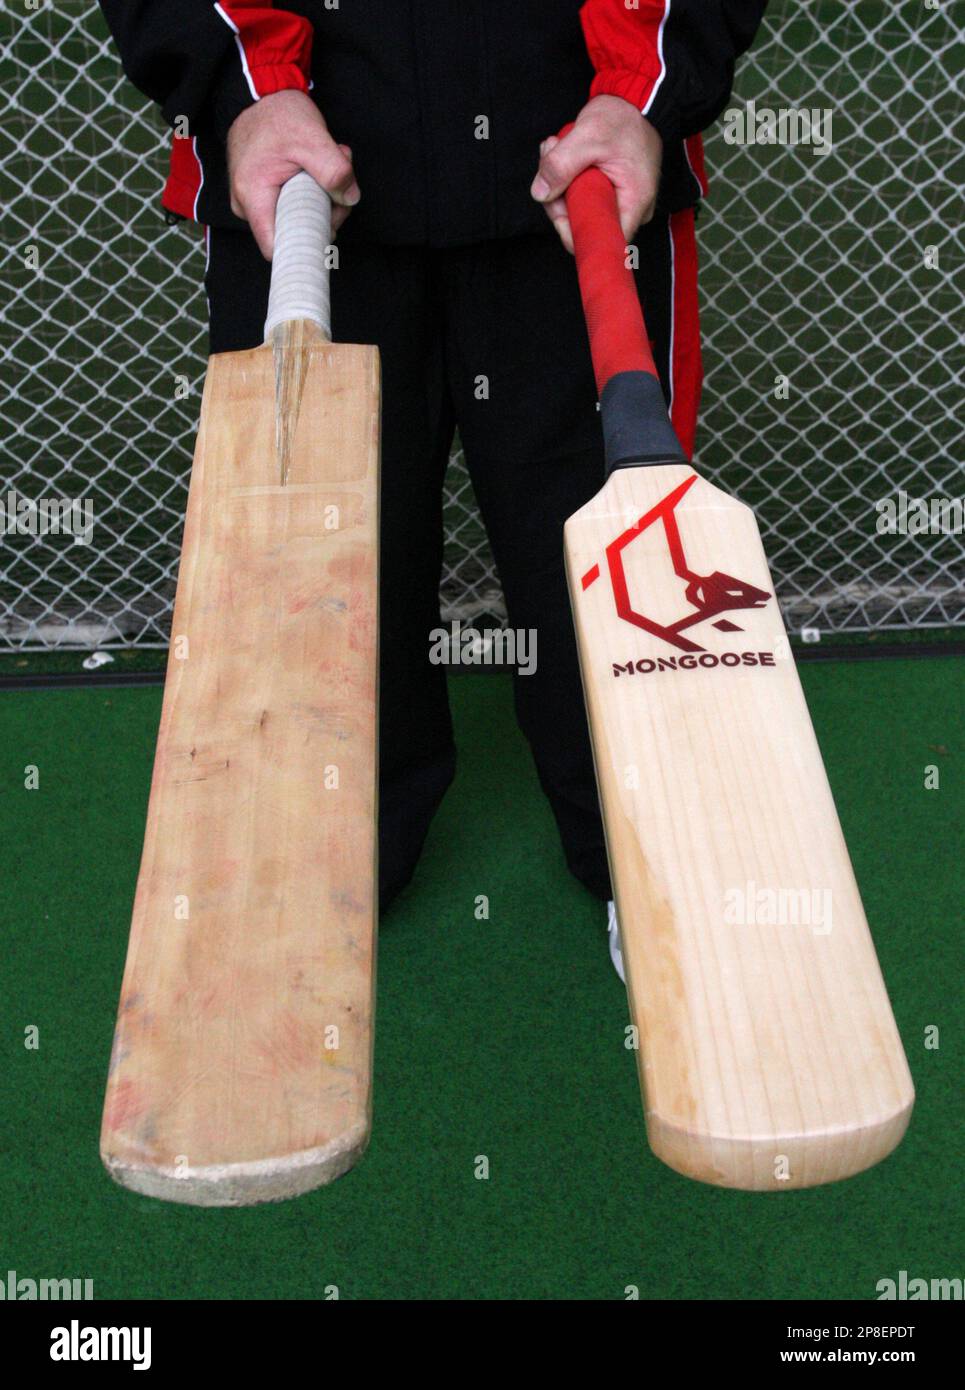 The new Mongoose bat, right, is held next to a traditional bat at Lord's  cricket ground, London, Wednesday May 22, 2009. The Mongoose cricket bat  which is 33 per cent smaller than